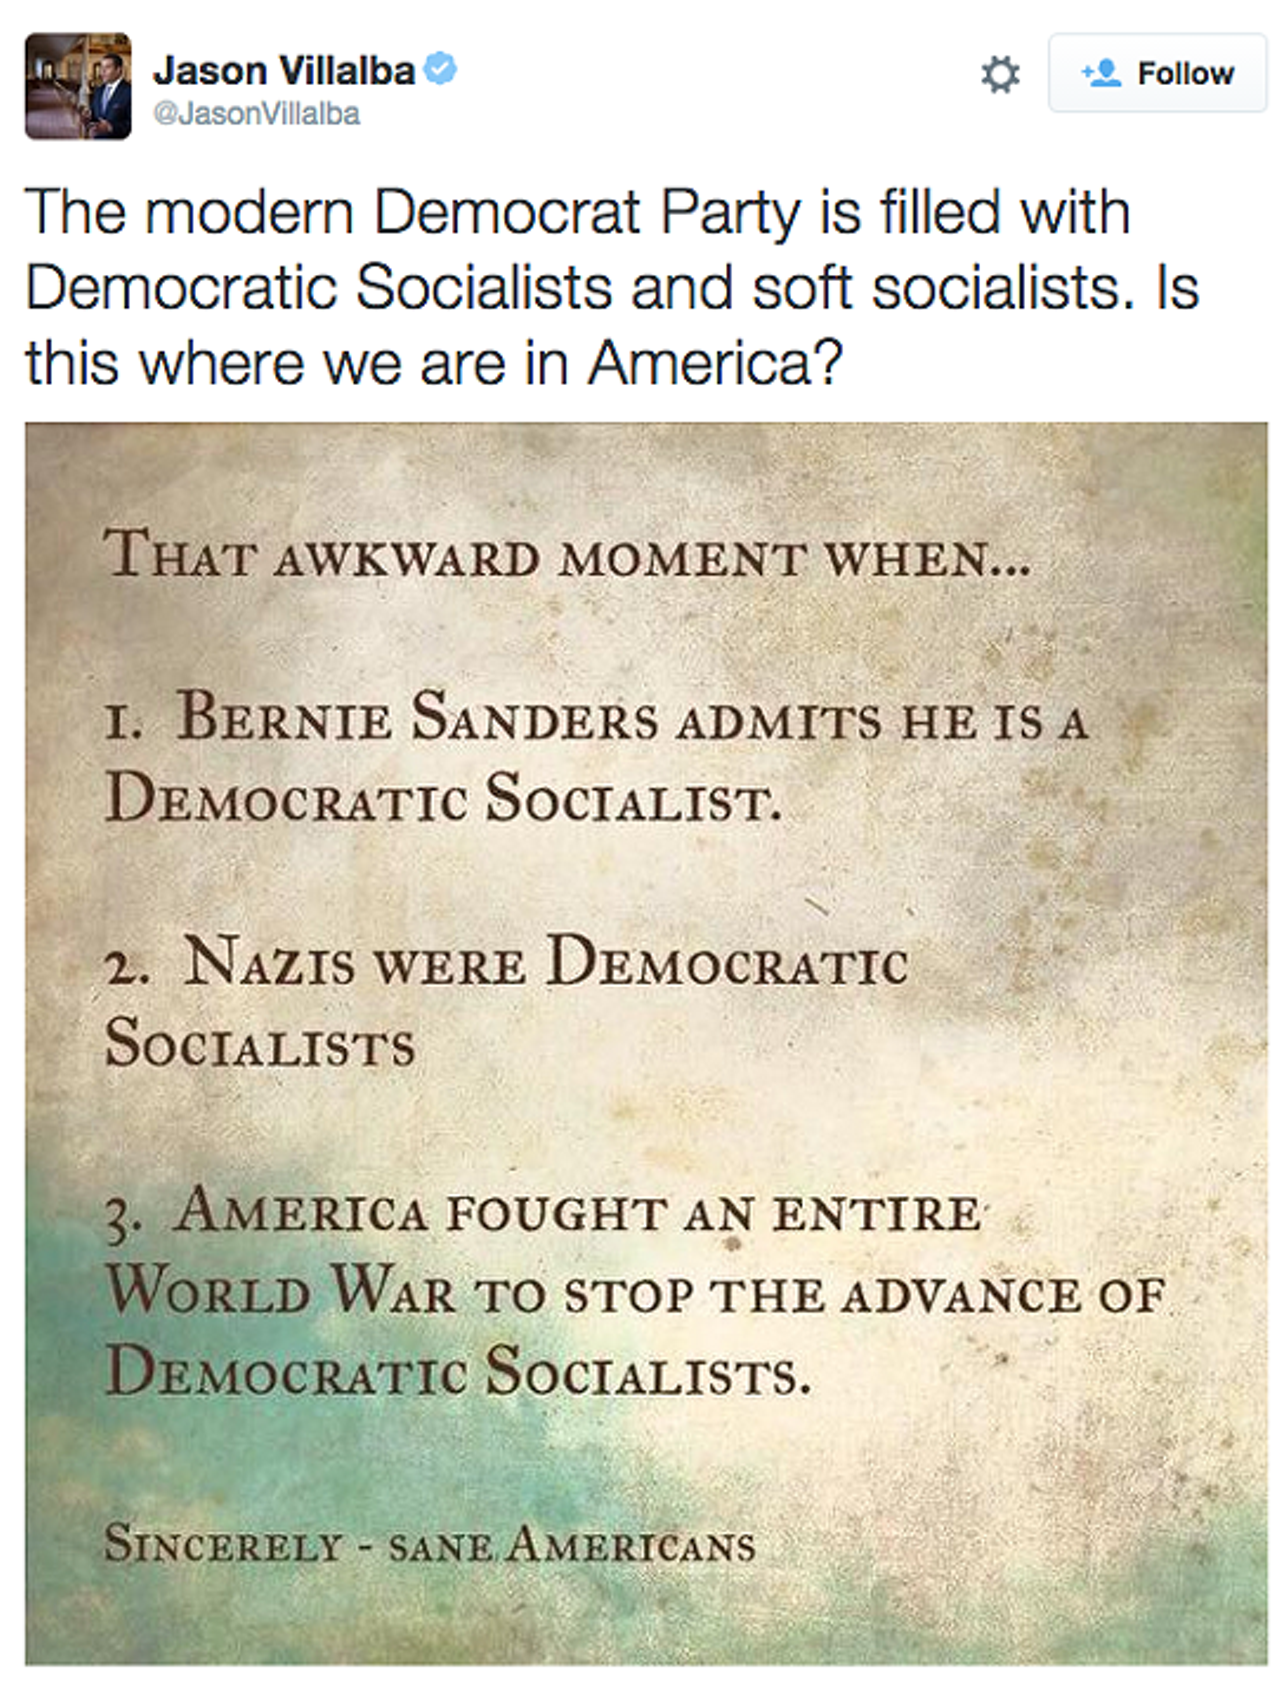 &#147;The modern Democrat Party is filled with Democratic Socialists and soft socialists. Is this where we are in America?&#148; -- State Rep. Jason Villalba, R-Dallas, in a tweet comparing Sen. Bernie Sanders to Nazis.